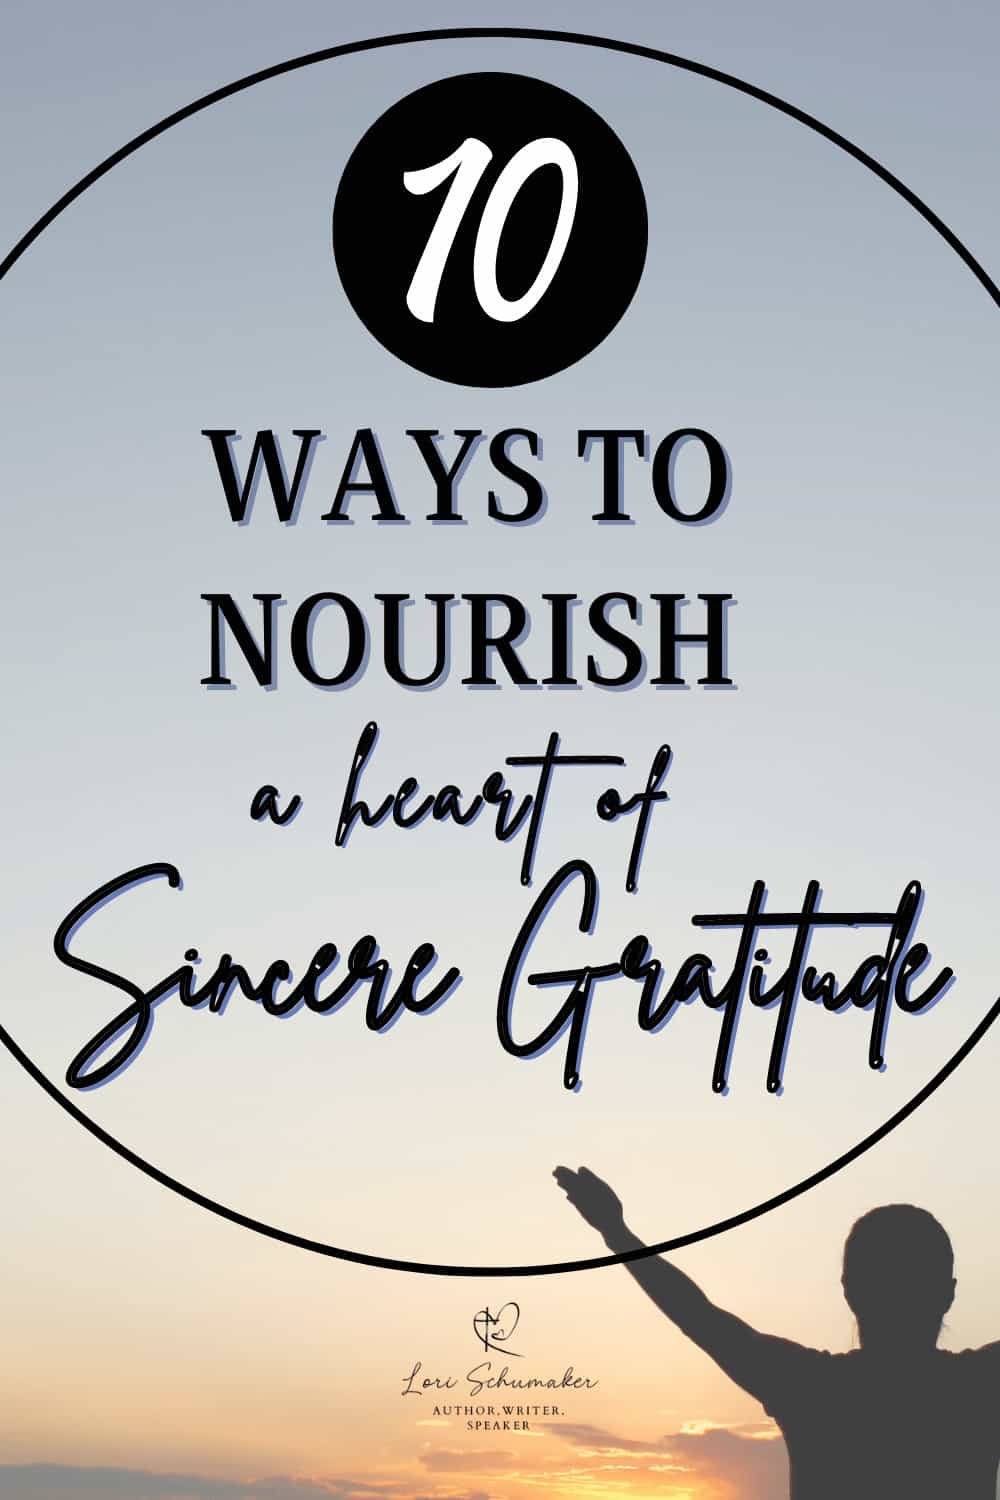 Would you like to live with a more positive outlook? With sincere gratitude? God told us about the power of gratitude long ago and science has proven more recently that people with sincere gratitude live healthier happier lives. Join me for 10 ways to nourish a heart of sincere gratitude!